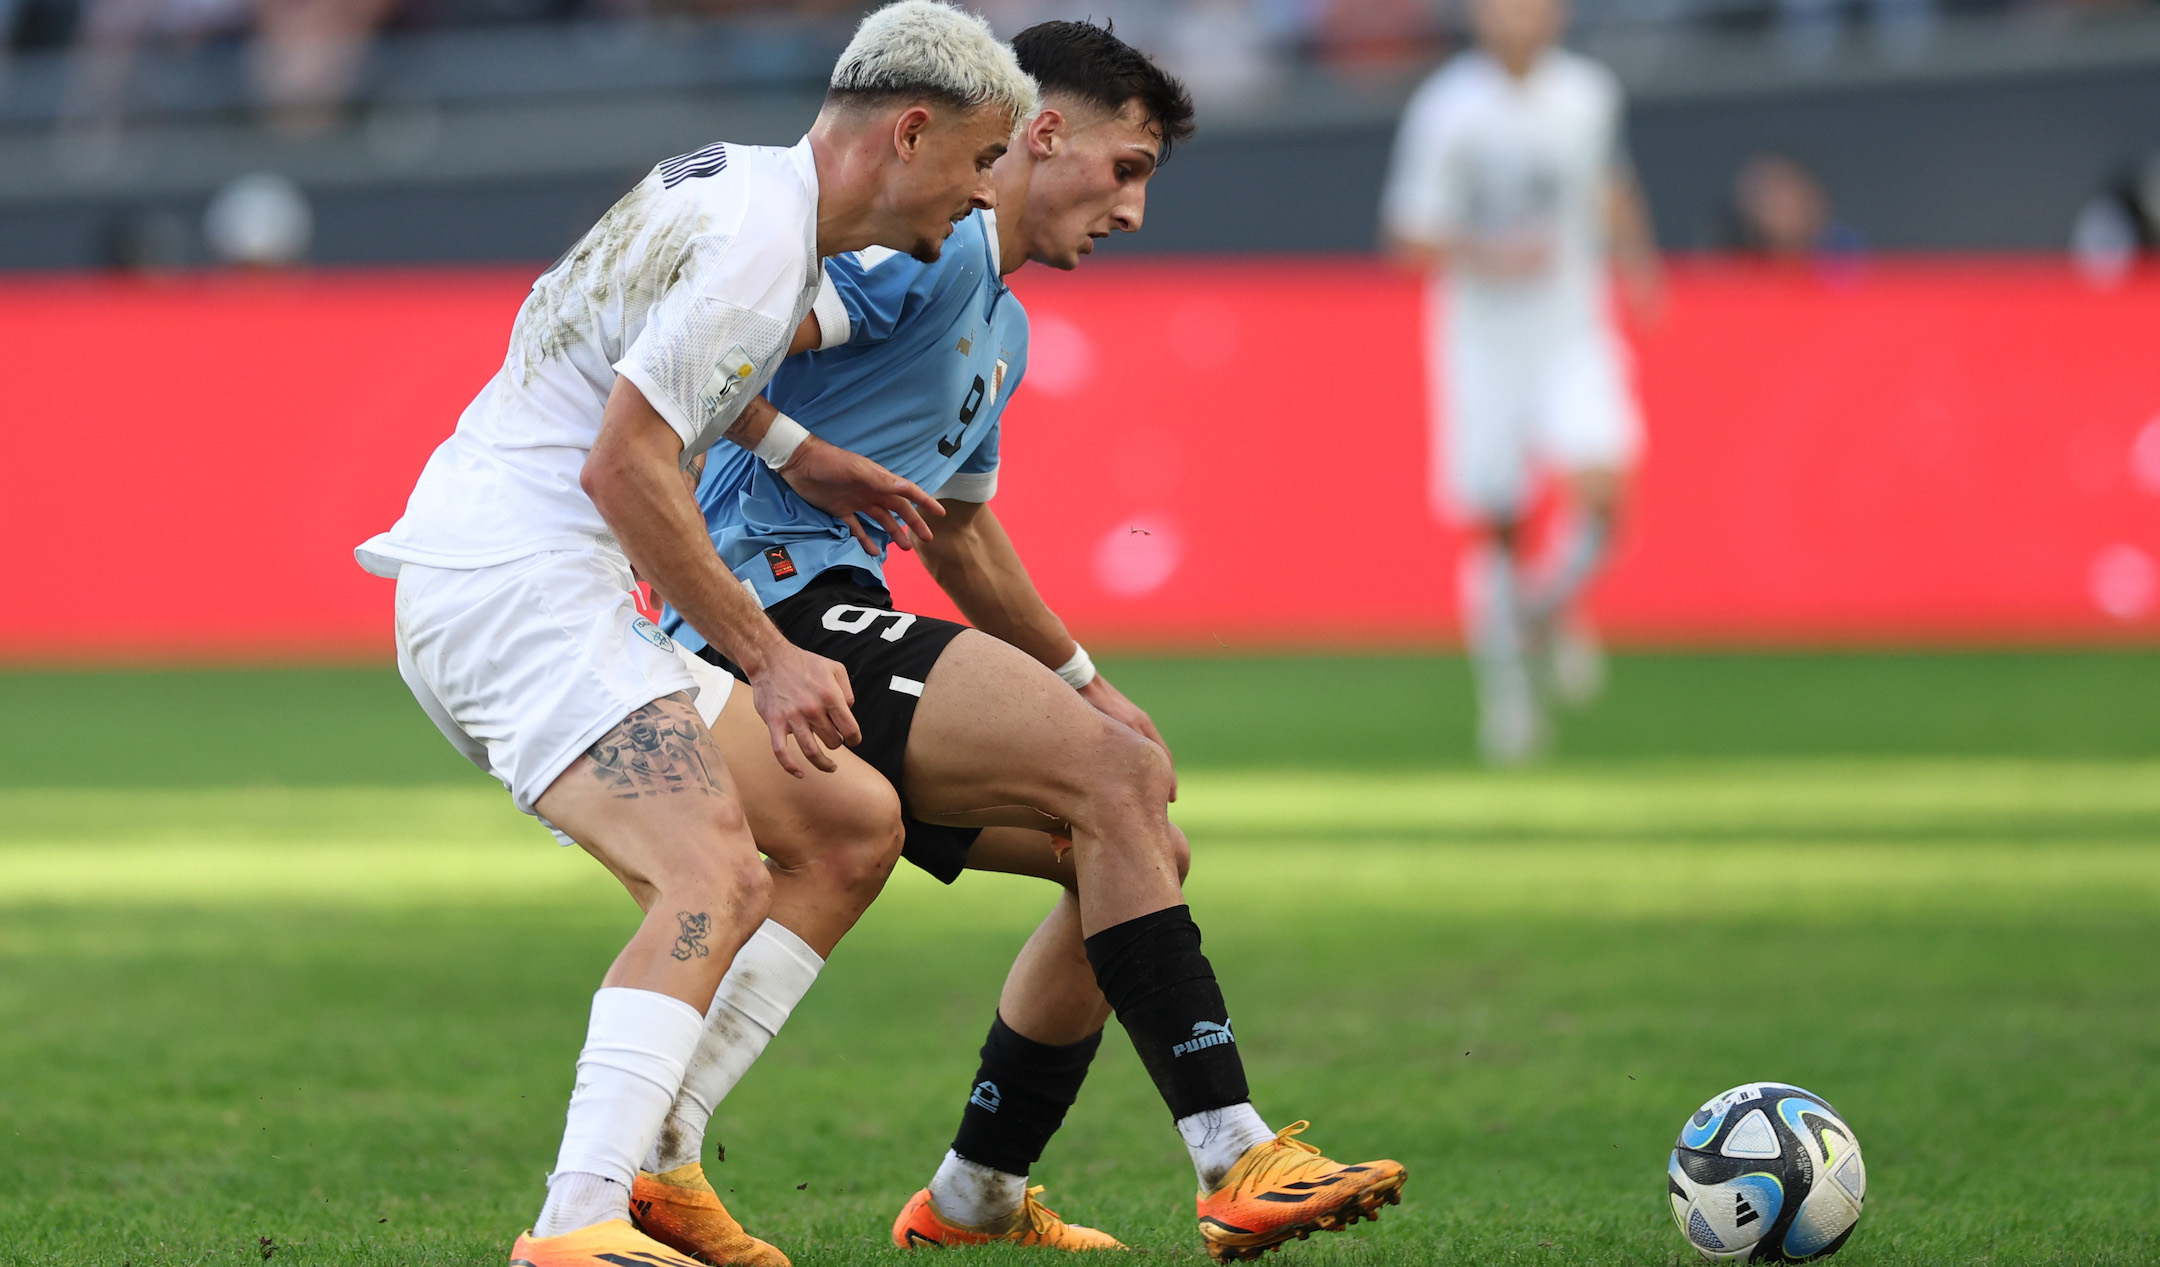 Israels historic U-20 World Cup soccer run comes to an end with loss to Uruguay